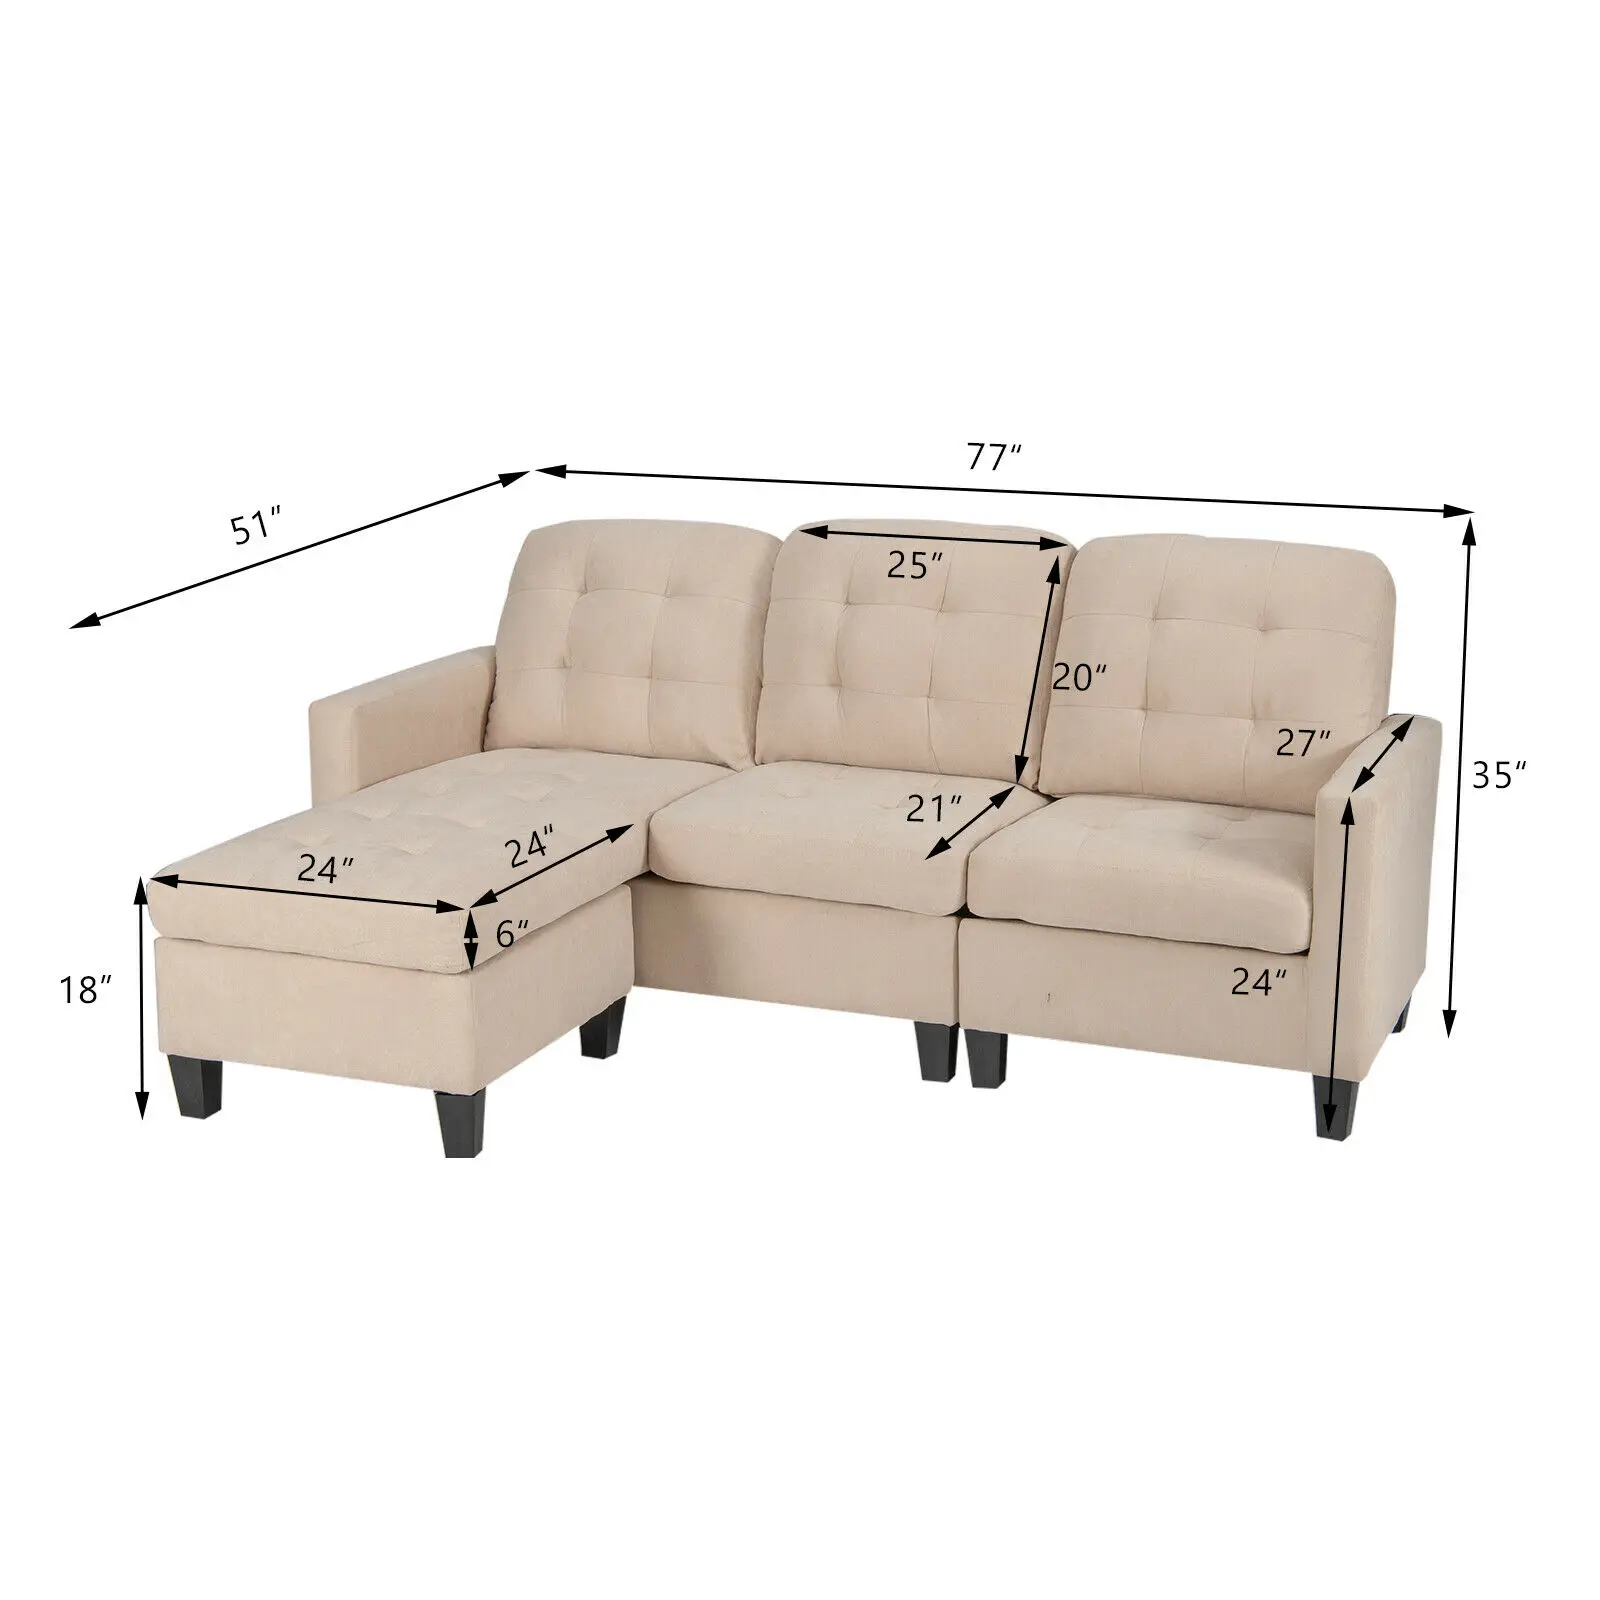 

Giantex L-shaped Convertible Sectional Sofa Couch with Reversible Chaise Beige